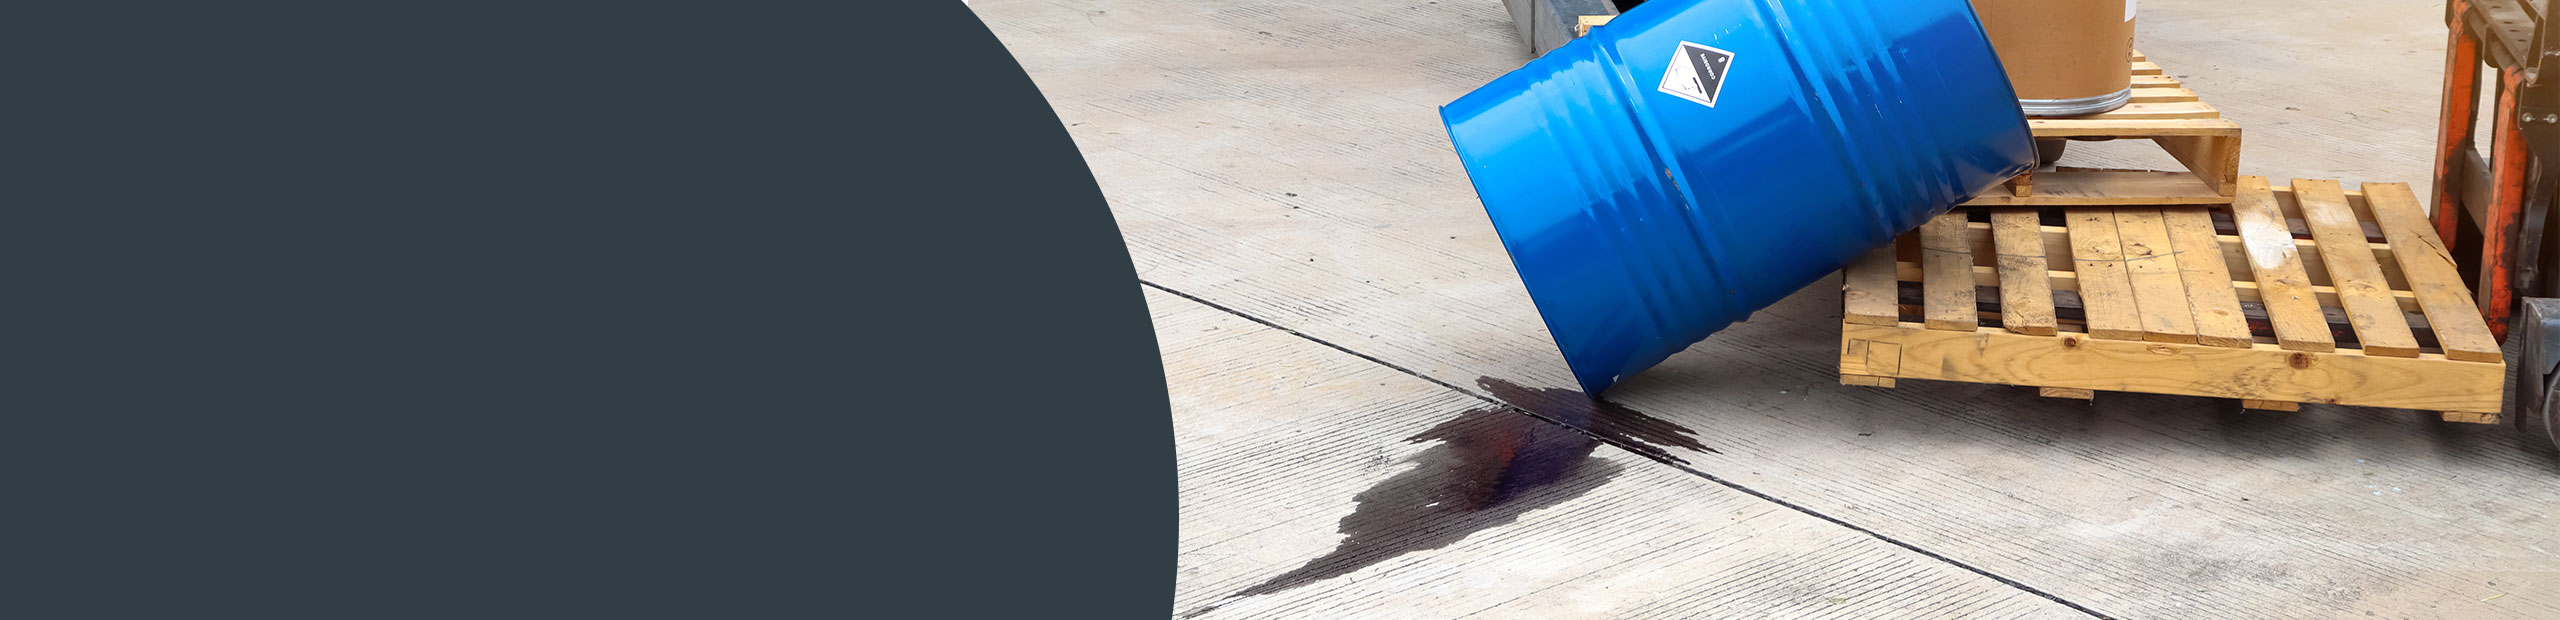 Chemical Spill Cleaning - Barnet 